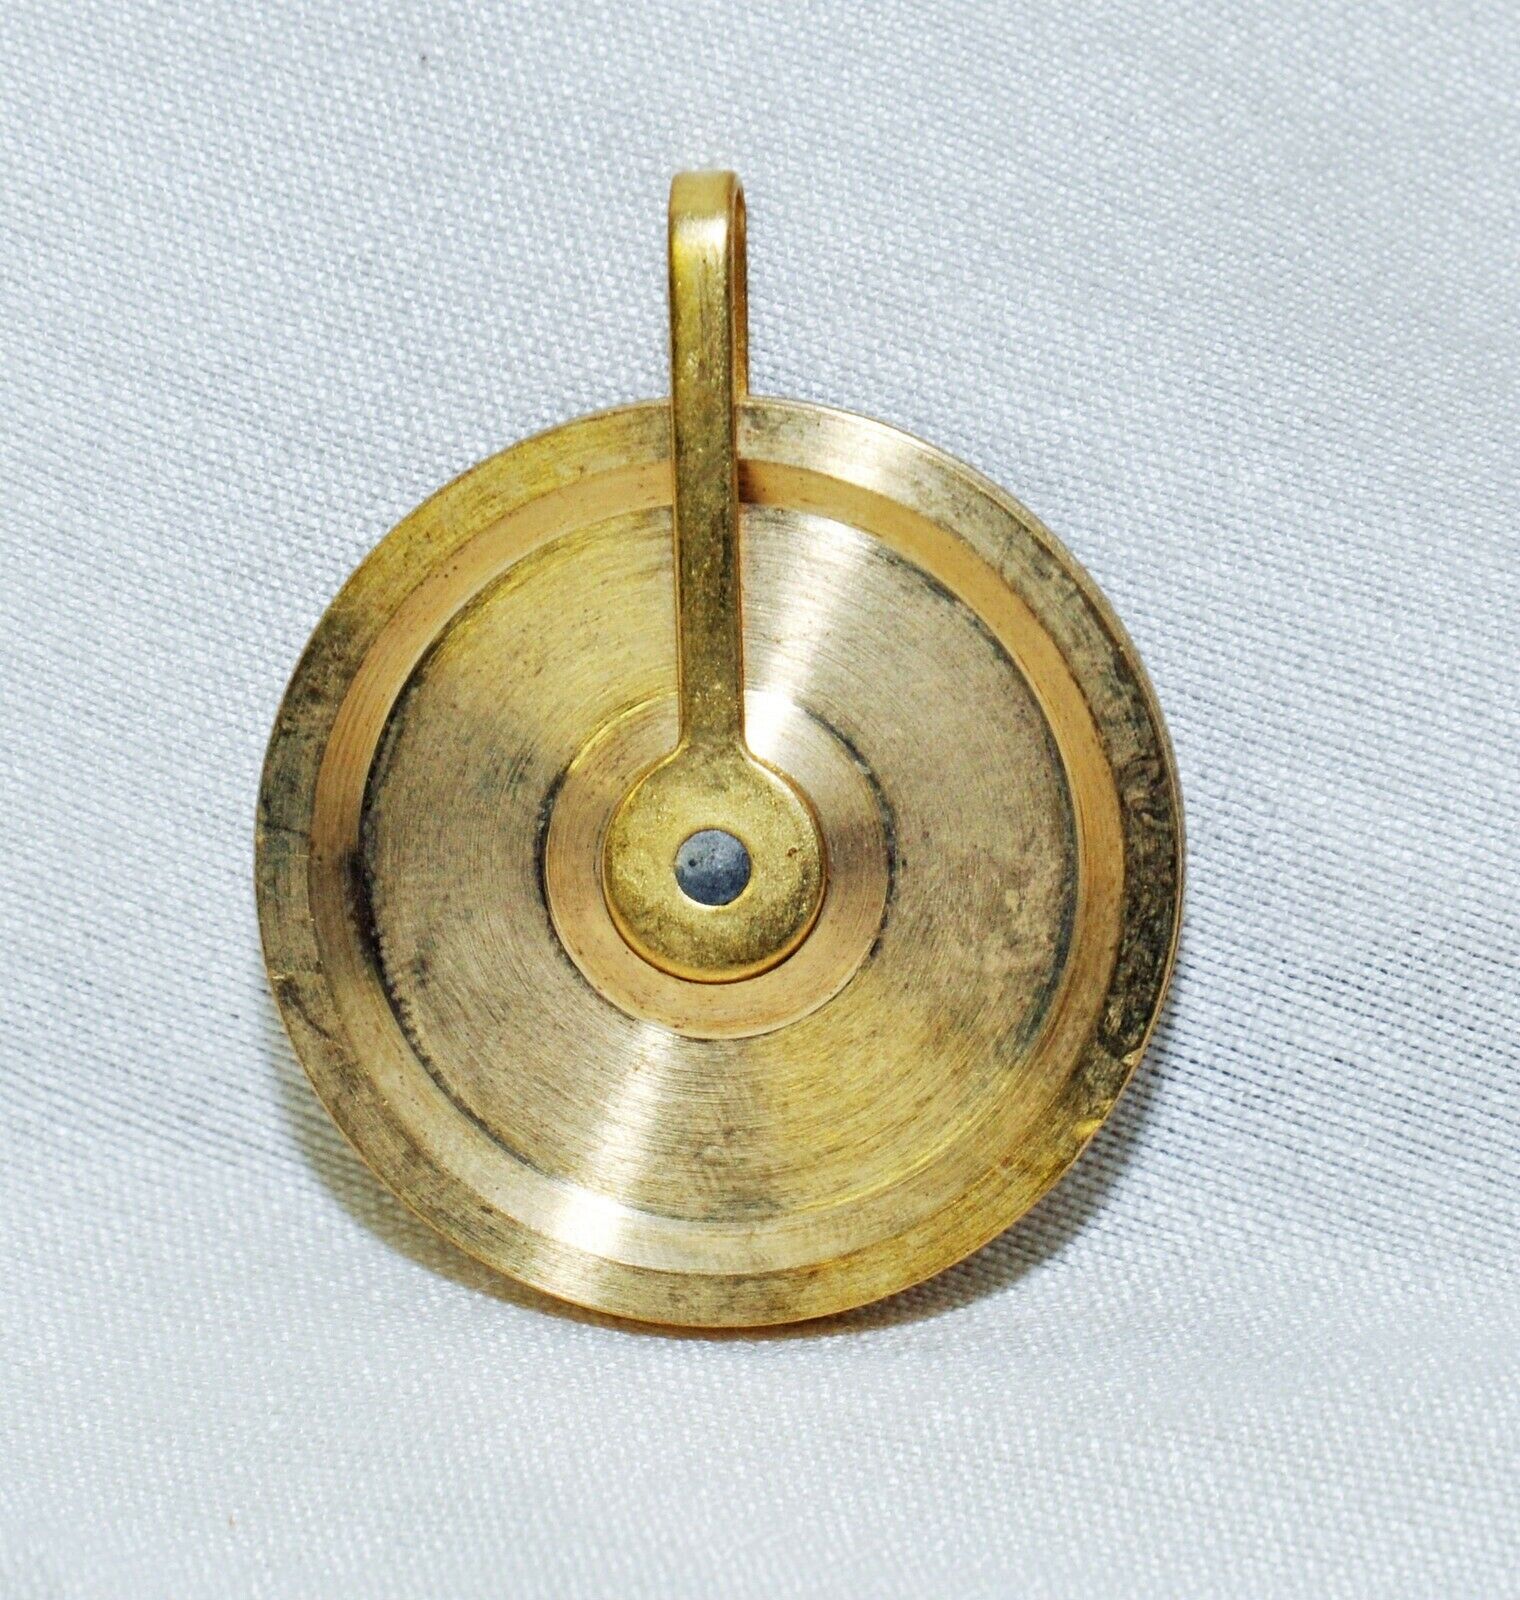 Willard Style Pulley for a Weight Banjo or Reg. Clock